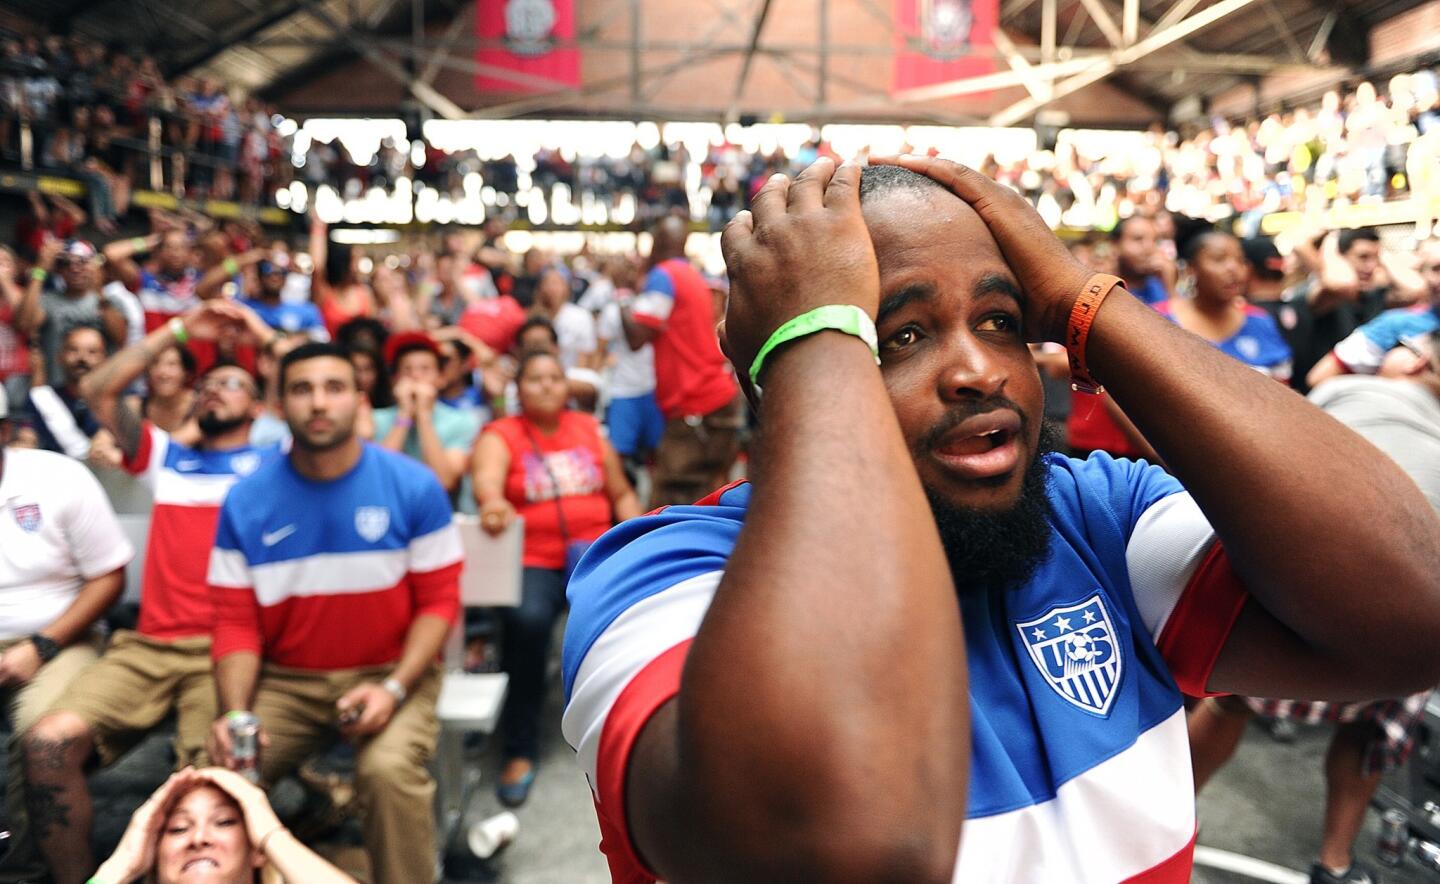 At a World Cup viewing party at a warehouse in downtown Los Angeles, fans can't bear to look after the U.S. gave up the tying goal against Portugal. There was also a second viewing party at Lot 613 in the Arts District. The game ended in a 2-2 tie.